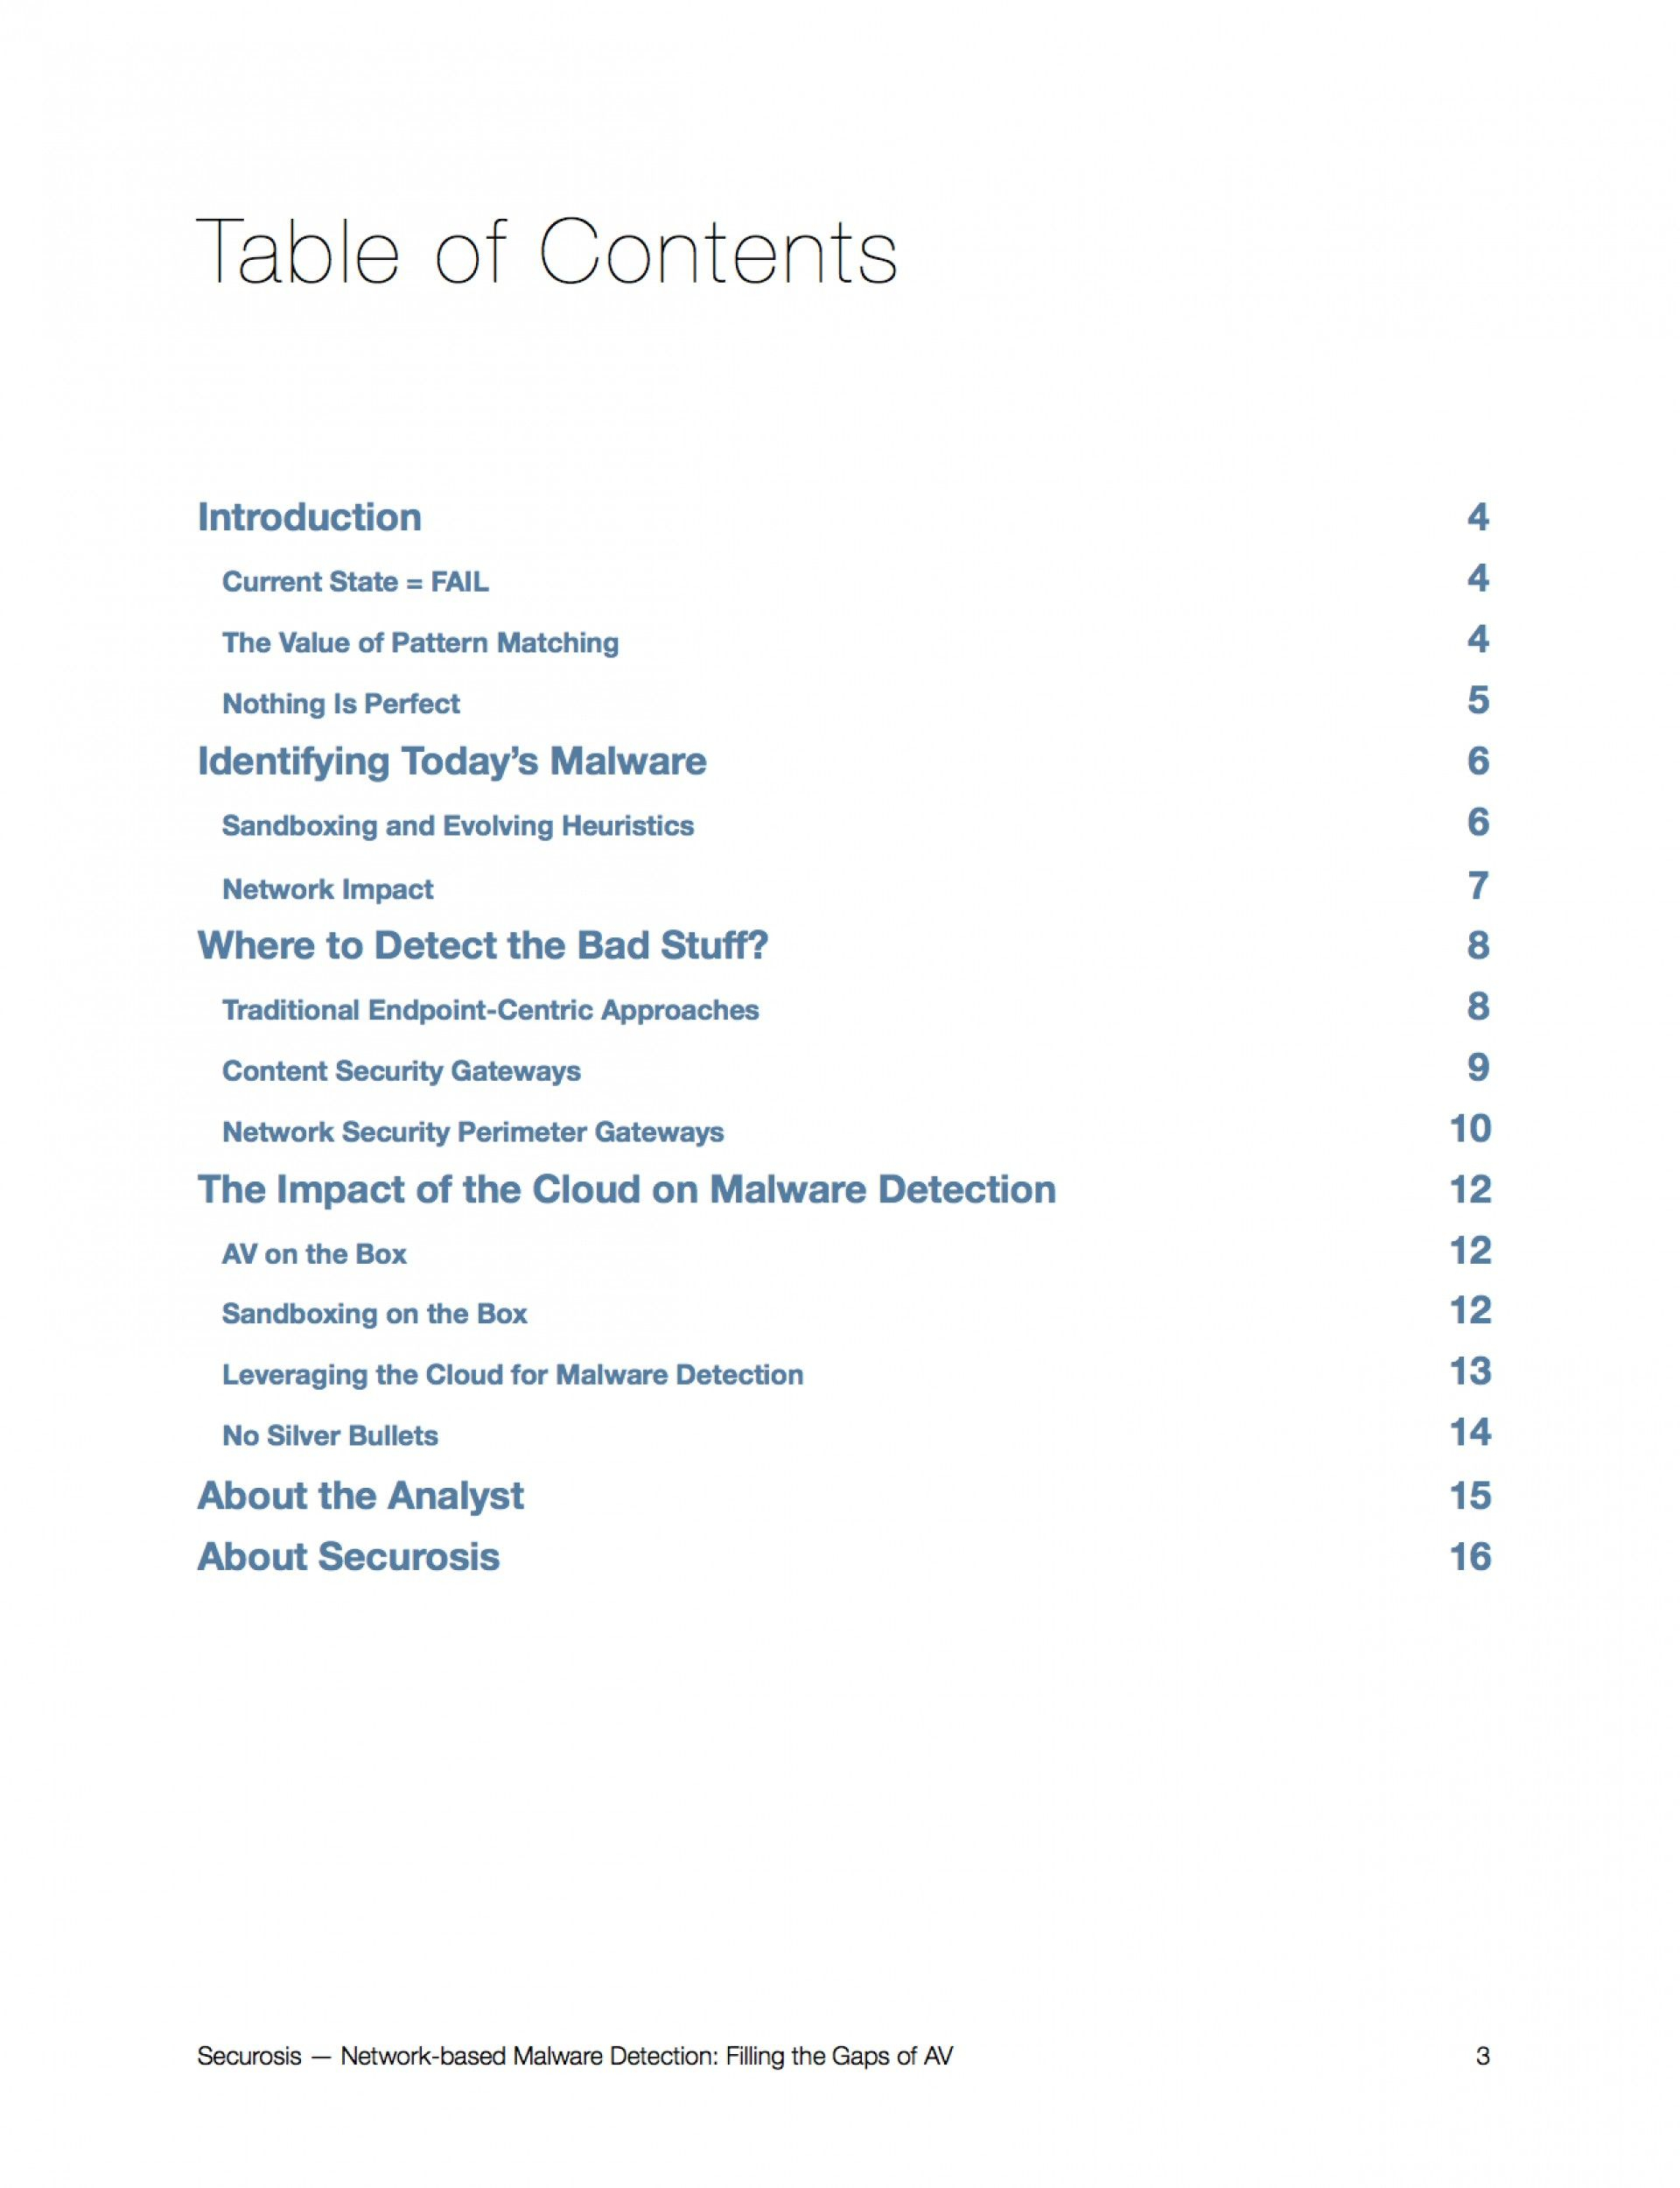 Contents Page Apa | Phd Creative Writing, Law School Pertaining To Apa Table Template Word